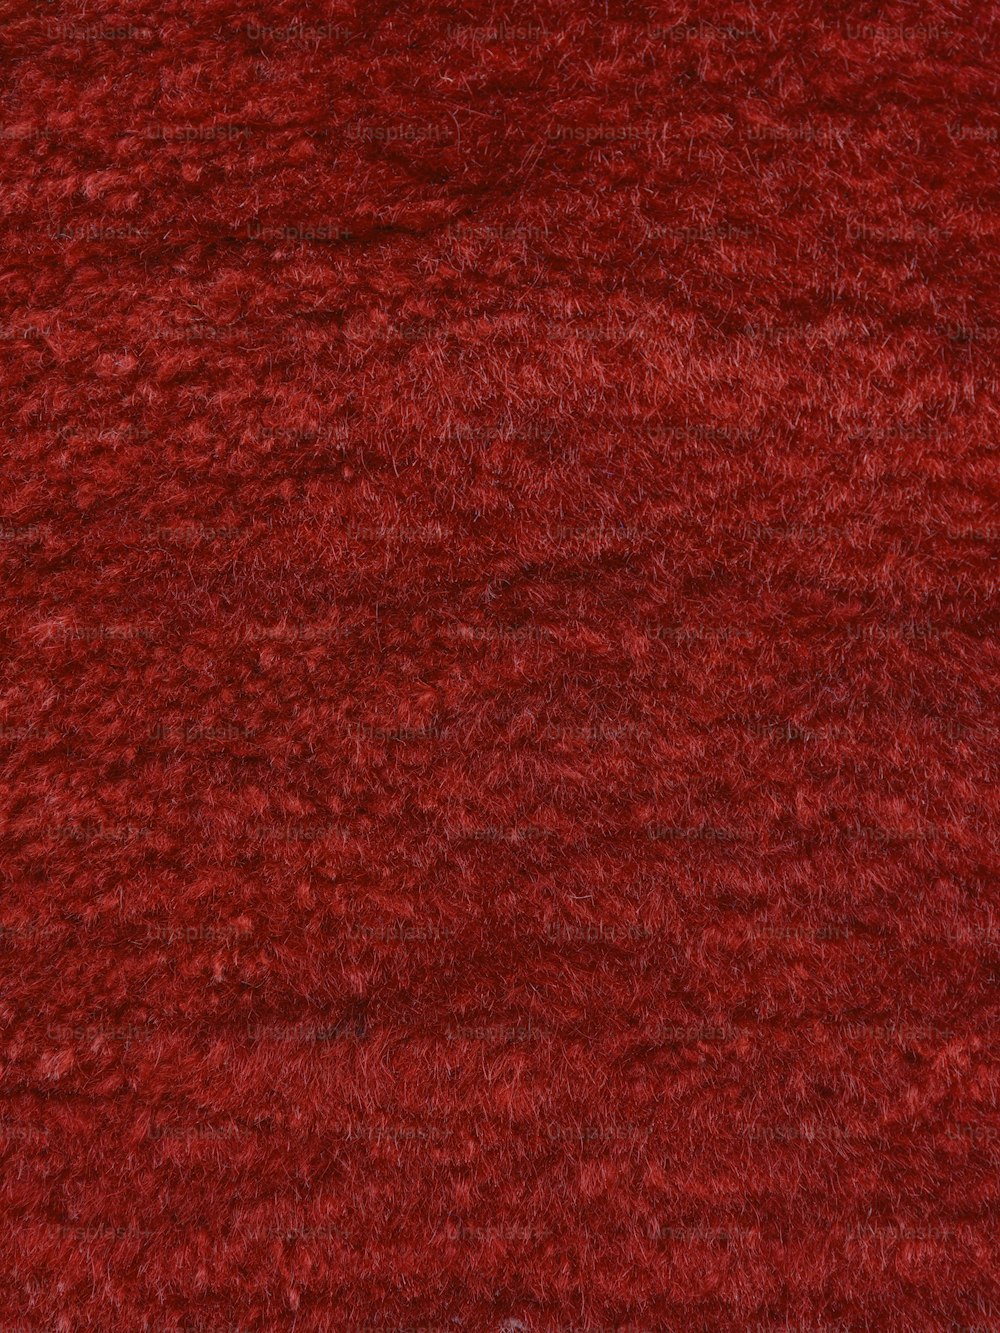 a close up of a red area rug